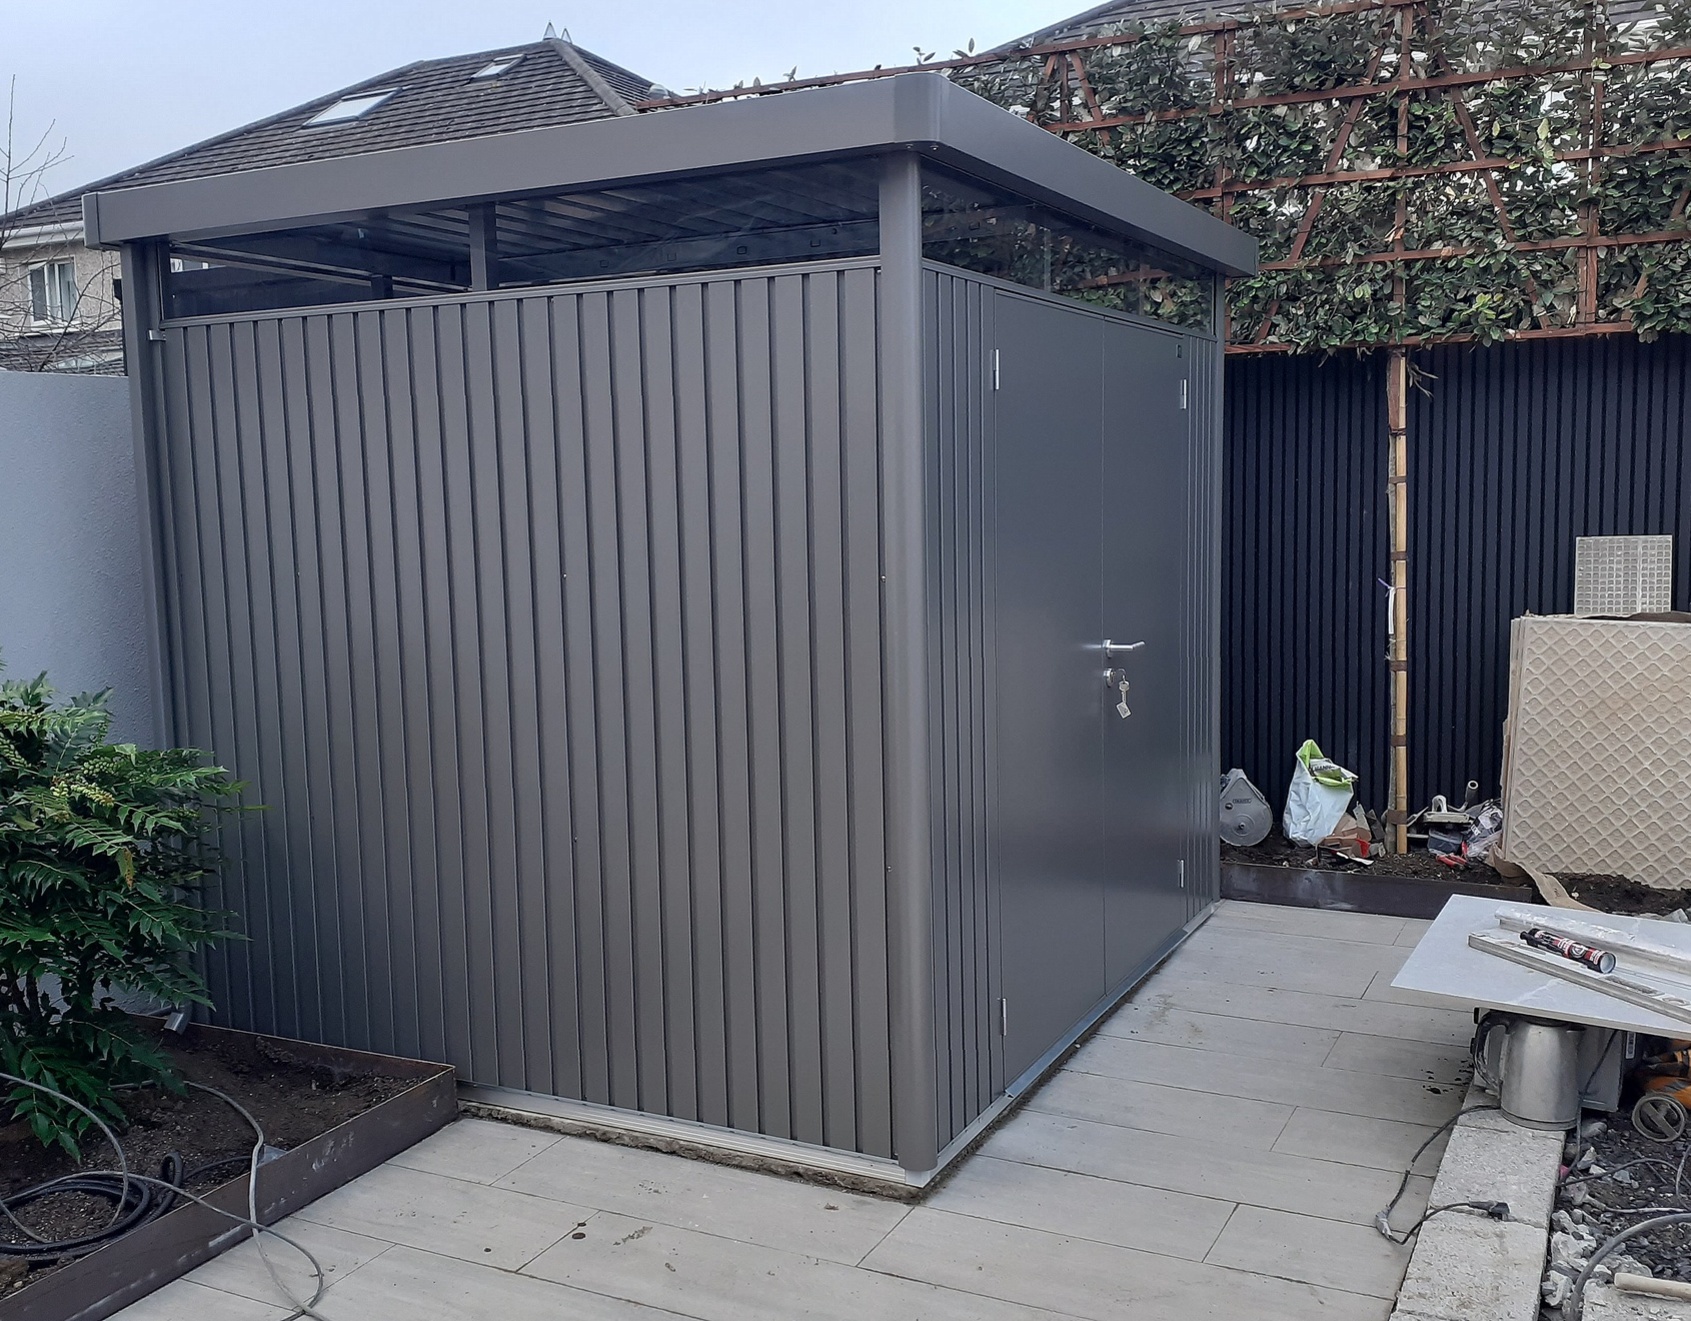 Biohort HighLine H3 Garden Shed - exceptional quality, modern steel garden shed, blending functionality, durability and sleek contemporary design  |  Supplied + Fitted in Malahide, Co Dublin by Owen Chubb Landscapers - Ireland's premier Biohort Supplier & Installer.